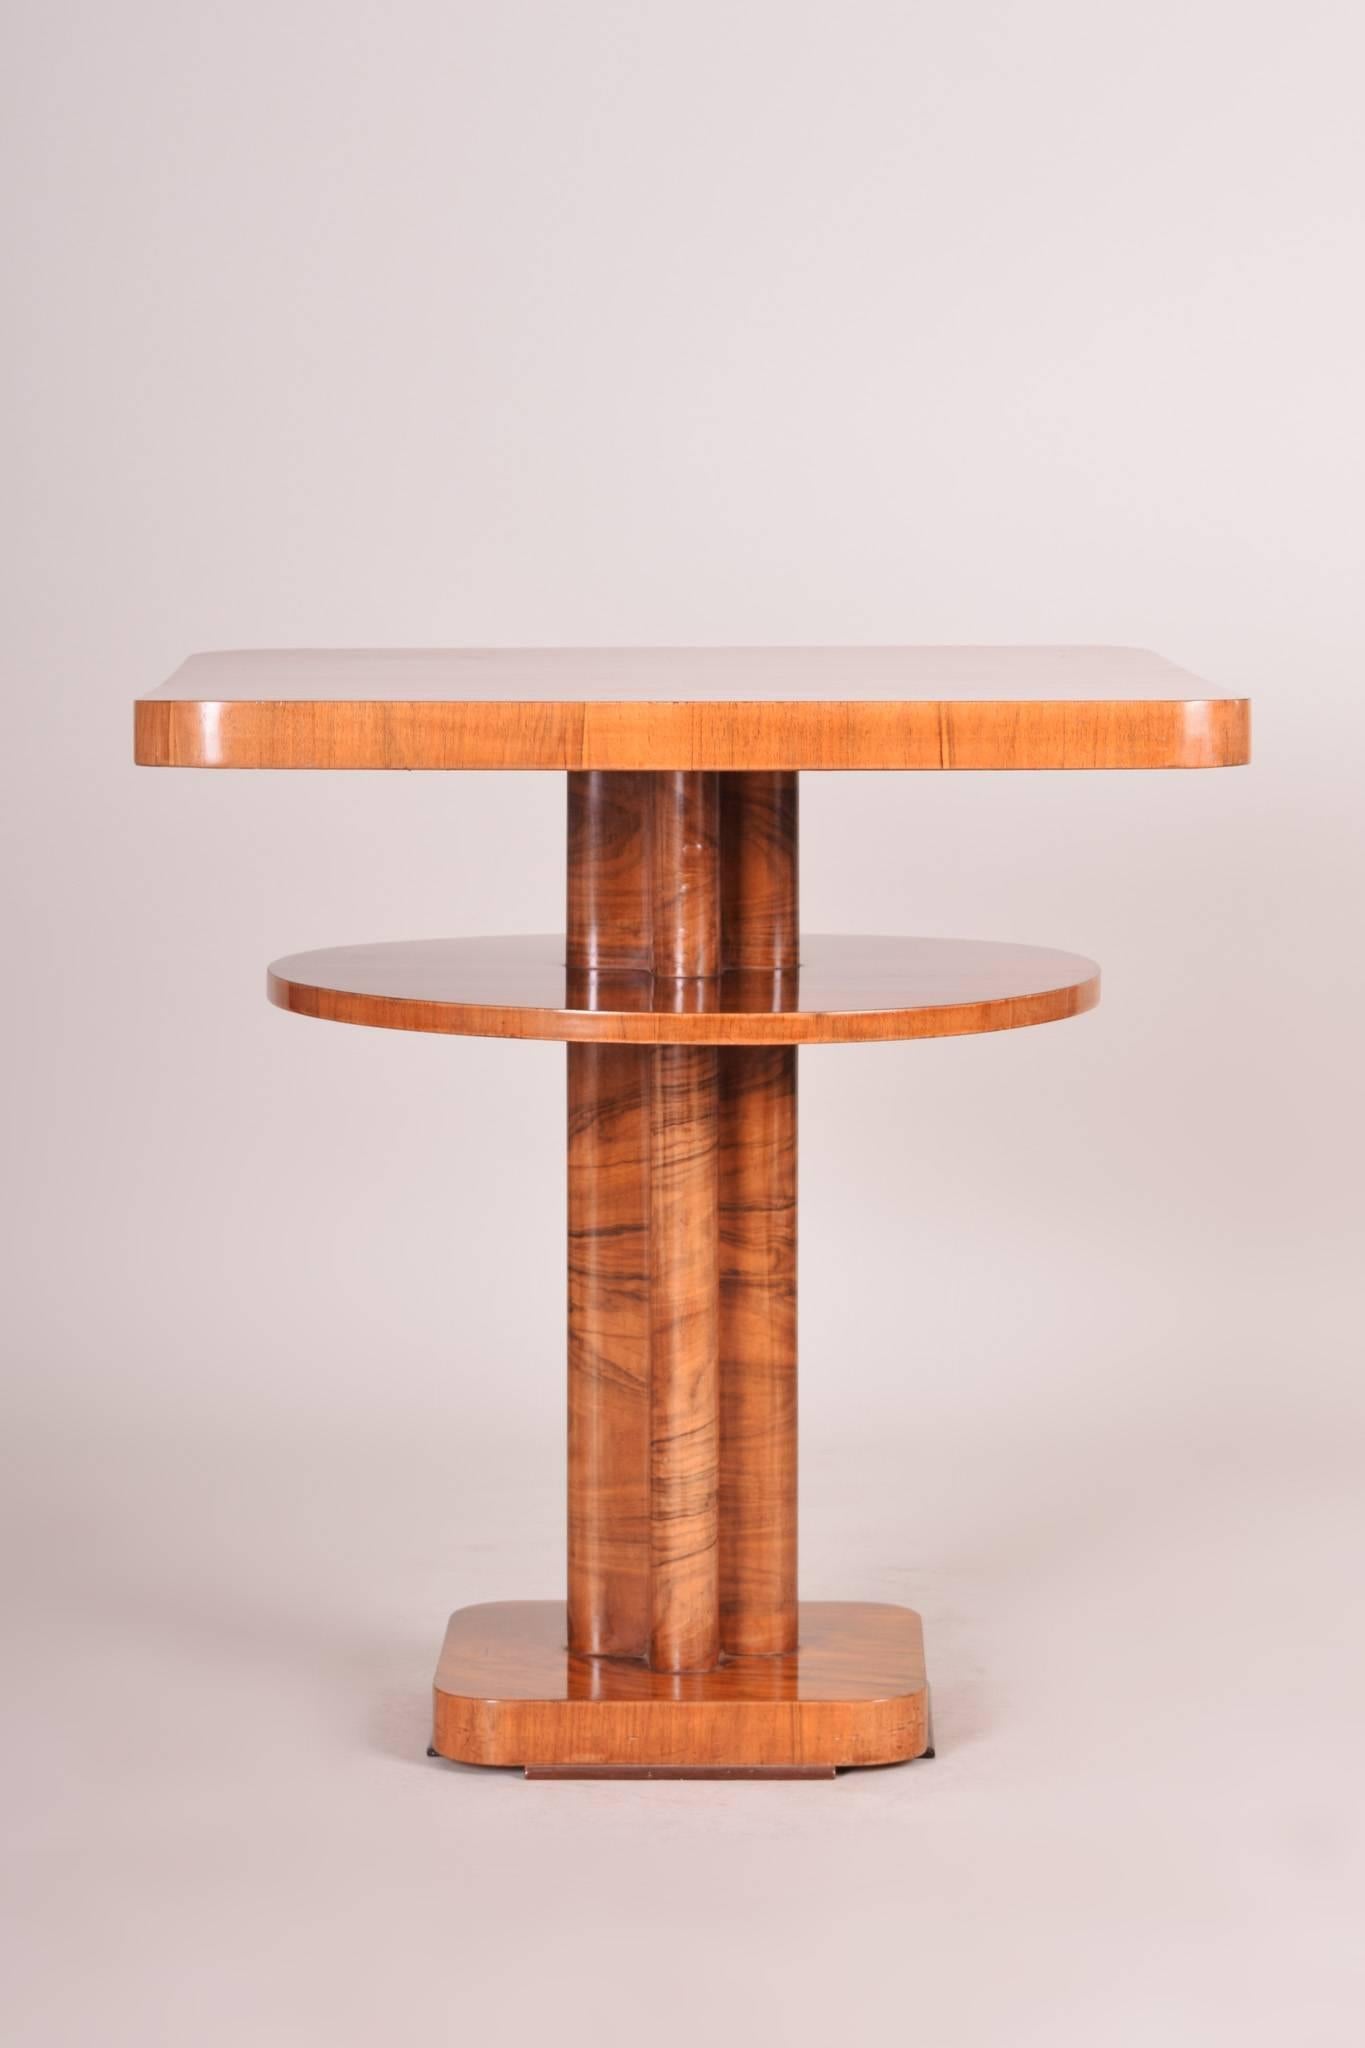 Art Deco table, Austria
Completely restored.
Material: Walnut.